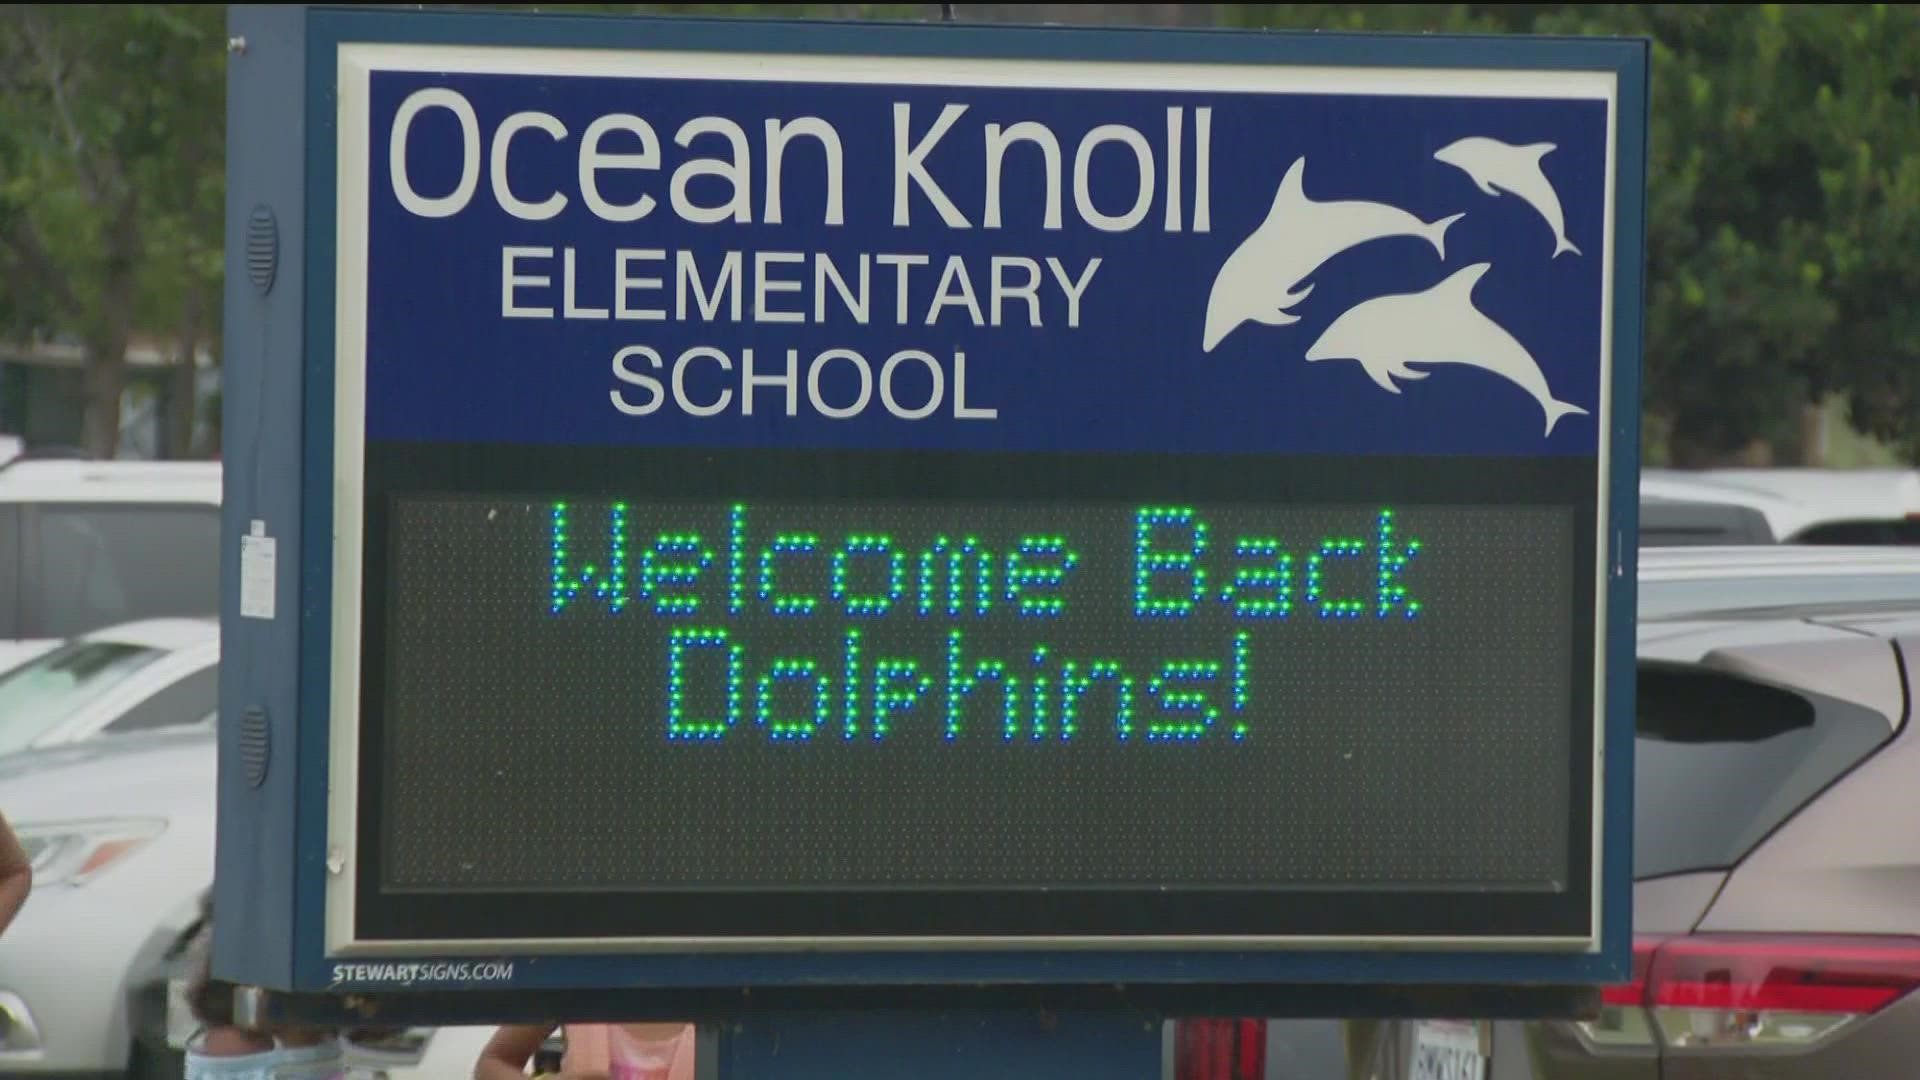 "It's the first day of school! We're excited to come back together as a true community," said Ocean Knoll Principal Claudia Bugarin.